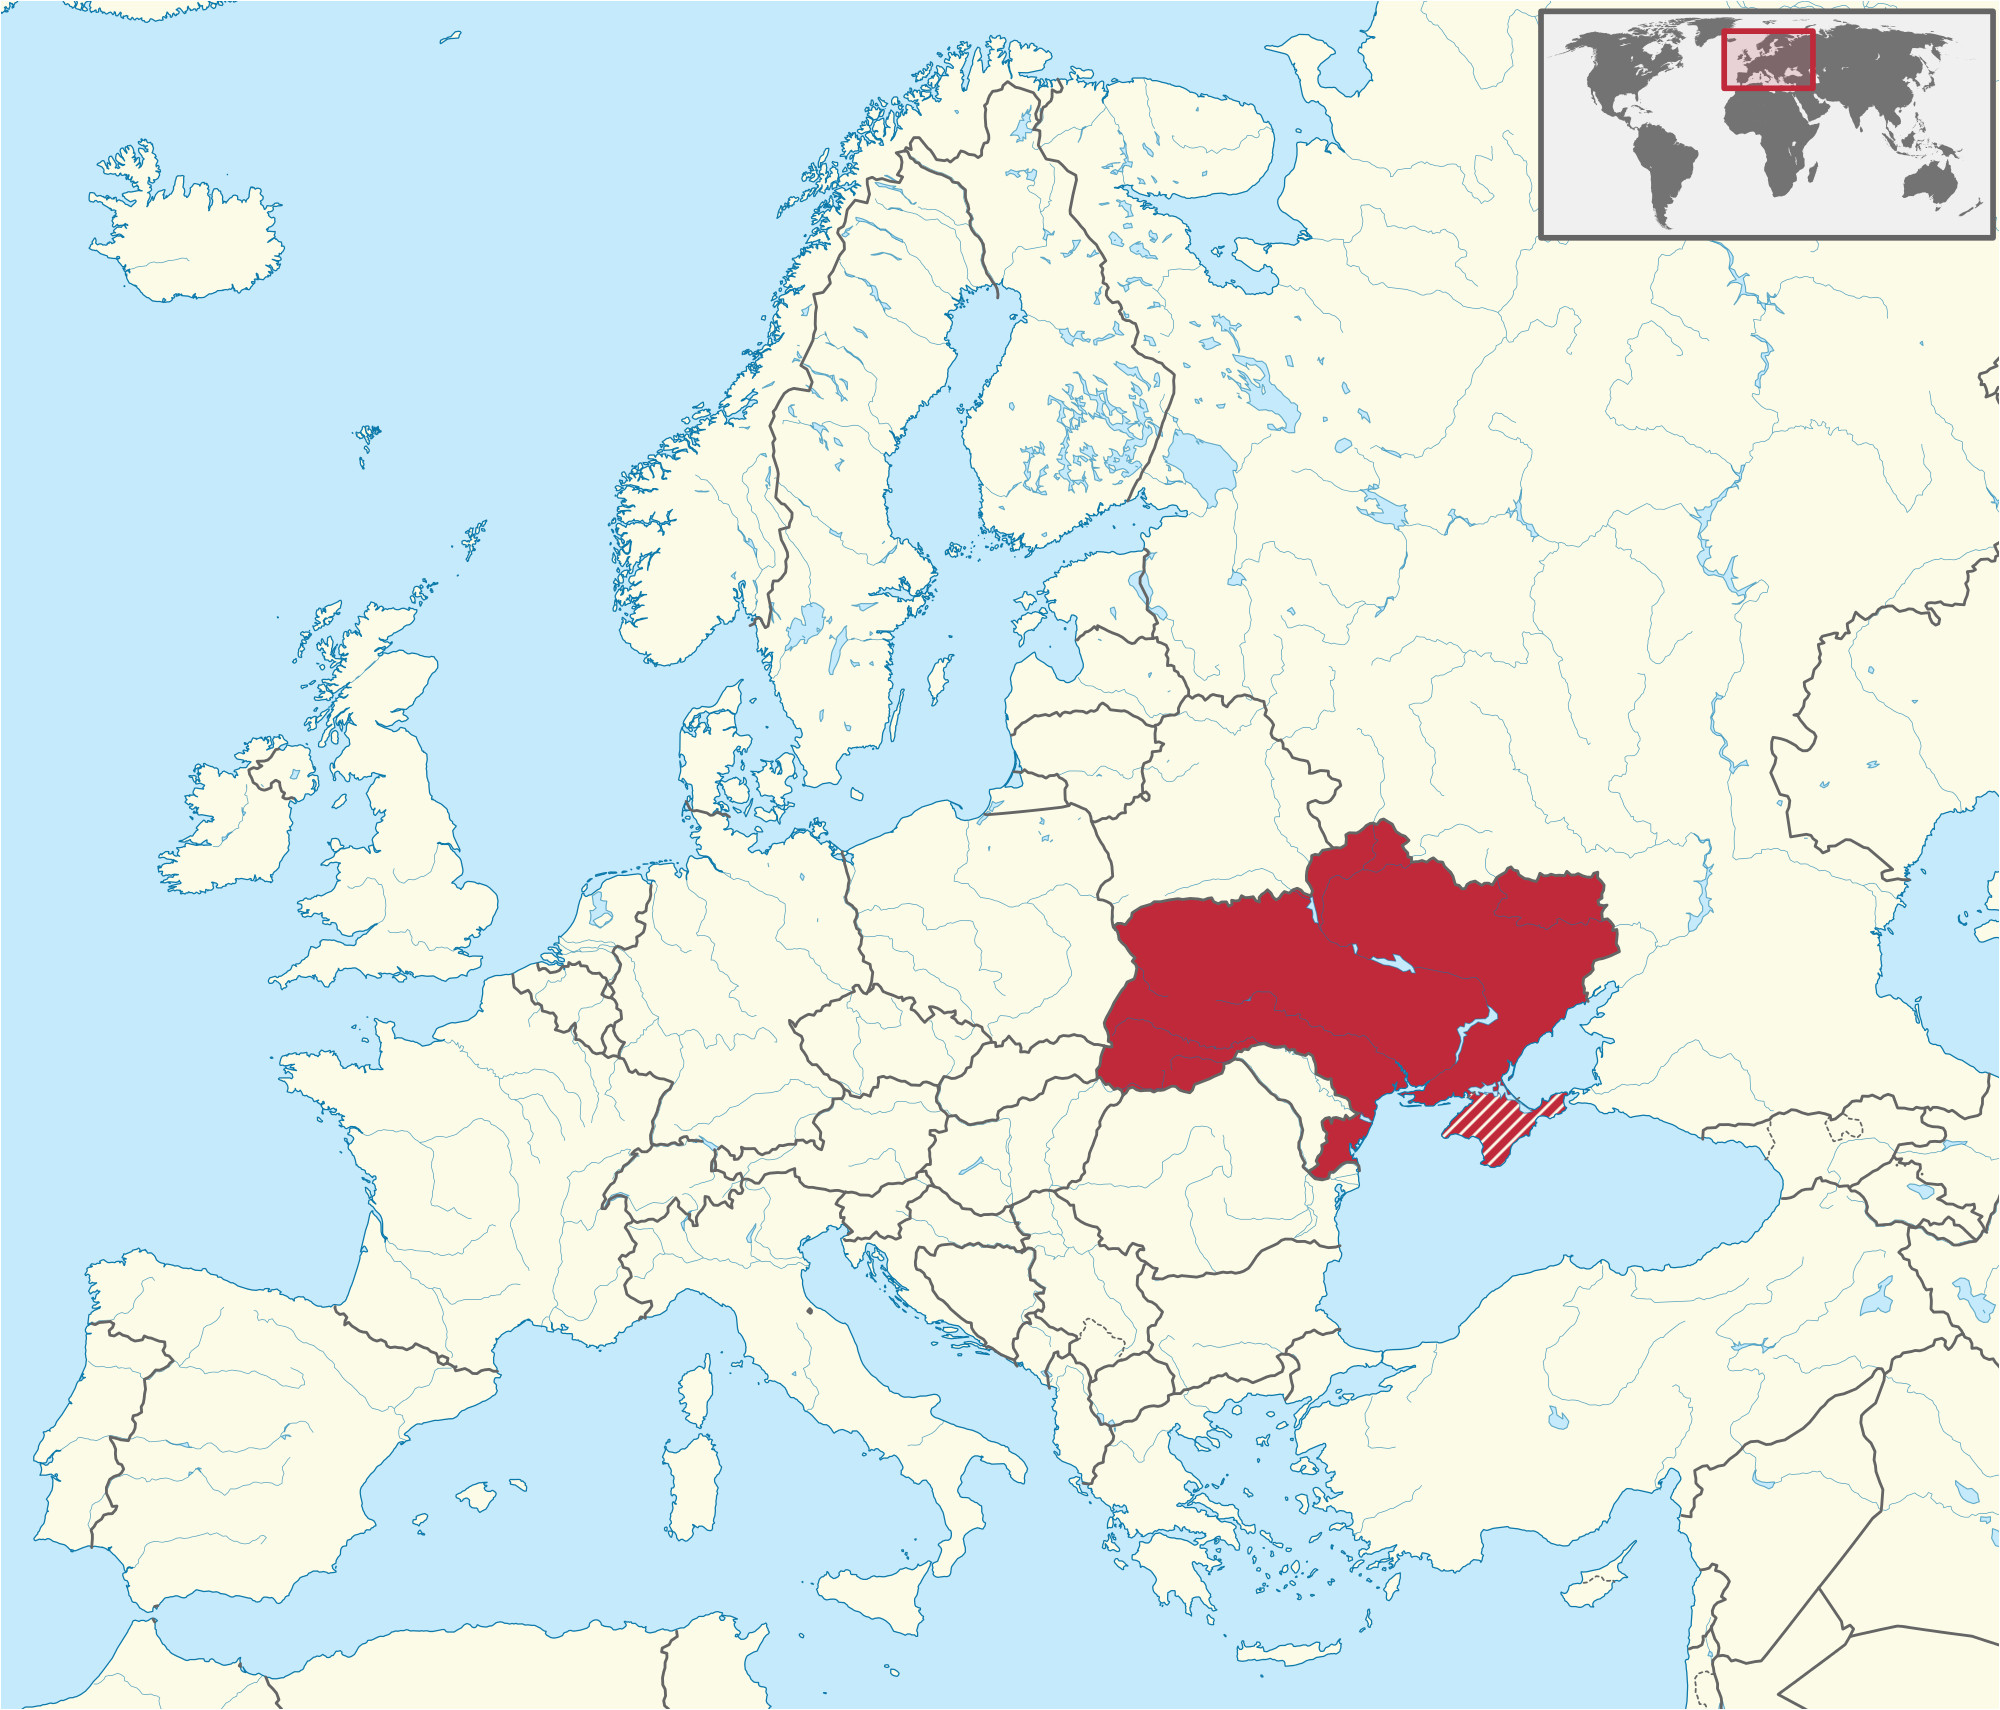 Ukraine On A Map Of Europe Datei Ukraine Claims Hatched In Europe Svg Wikipedia